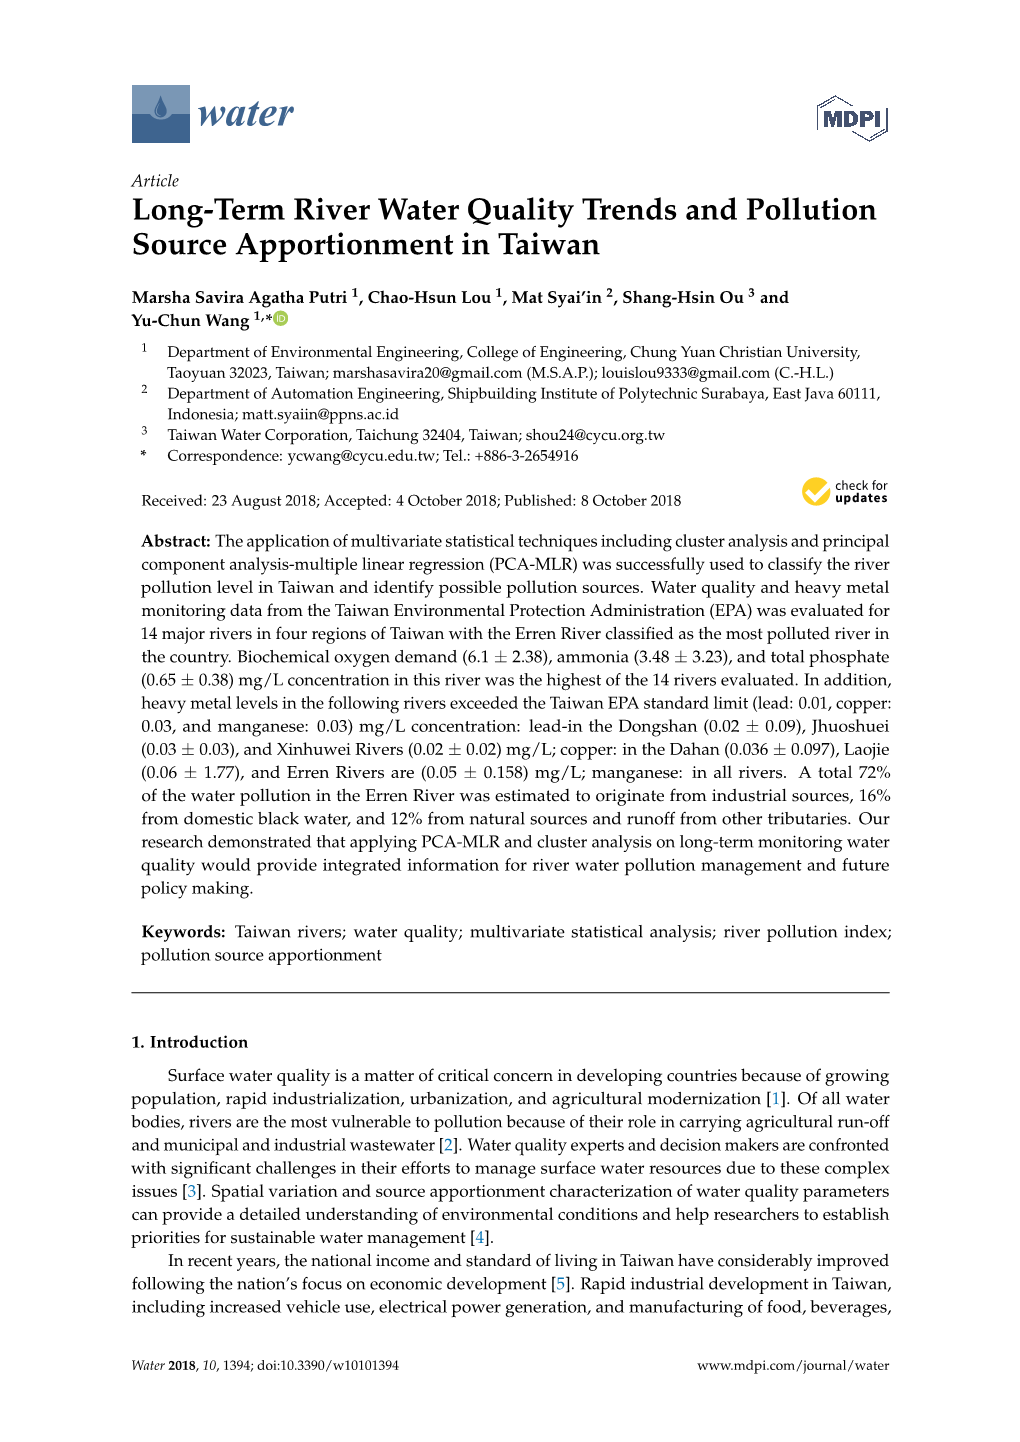 Long-Term River Water Quality Trends and Pollution Source Apportionment in Taiwan